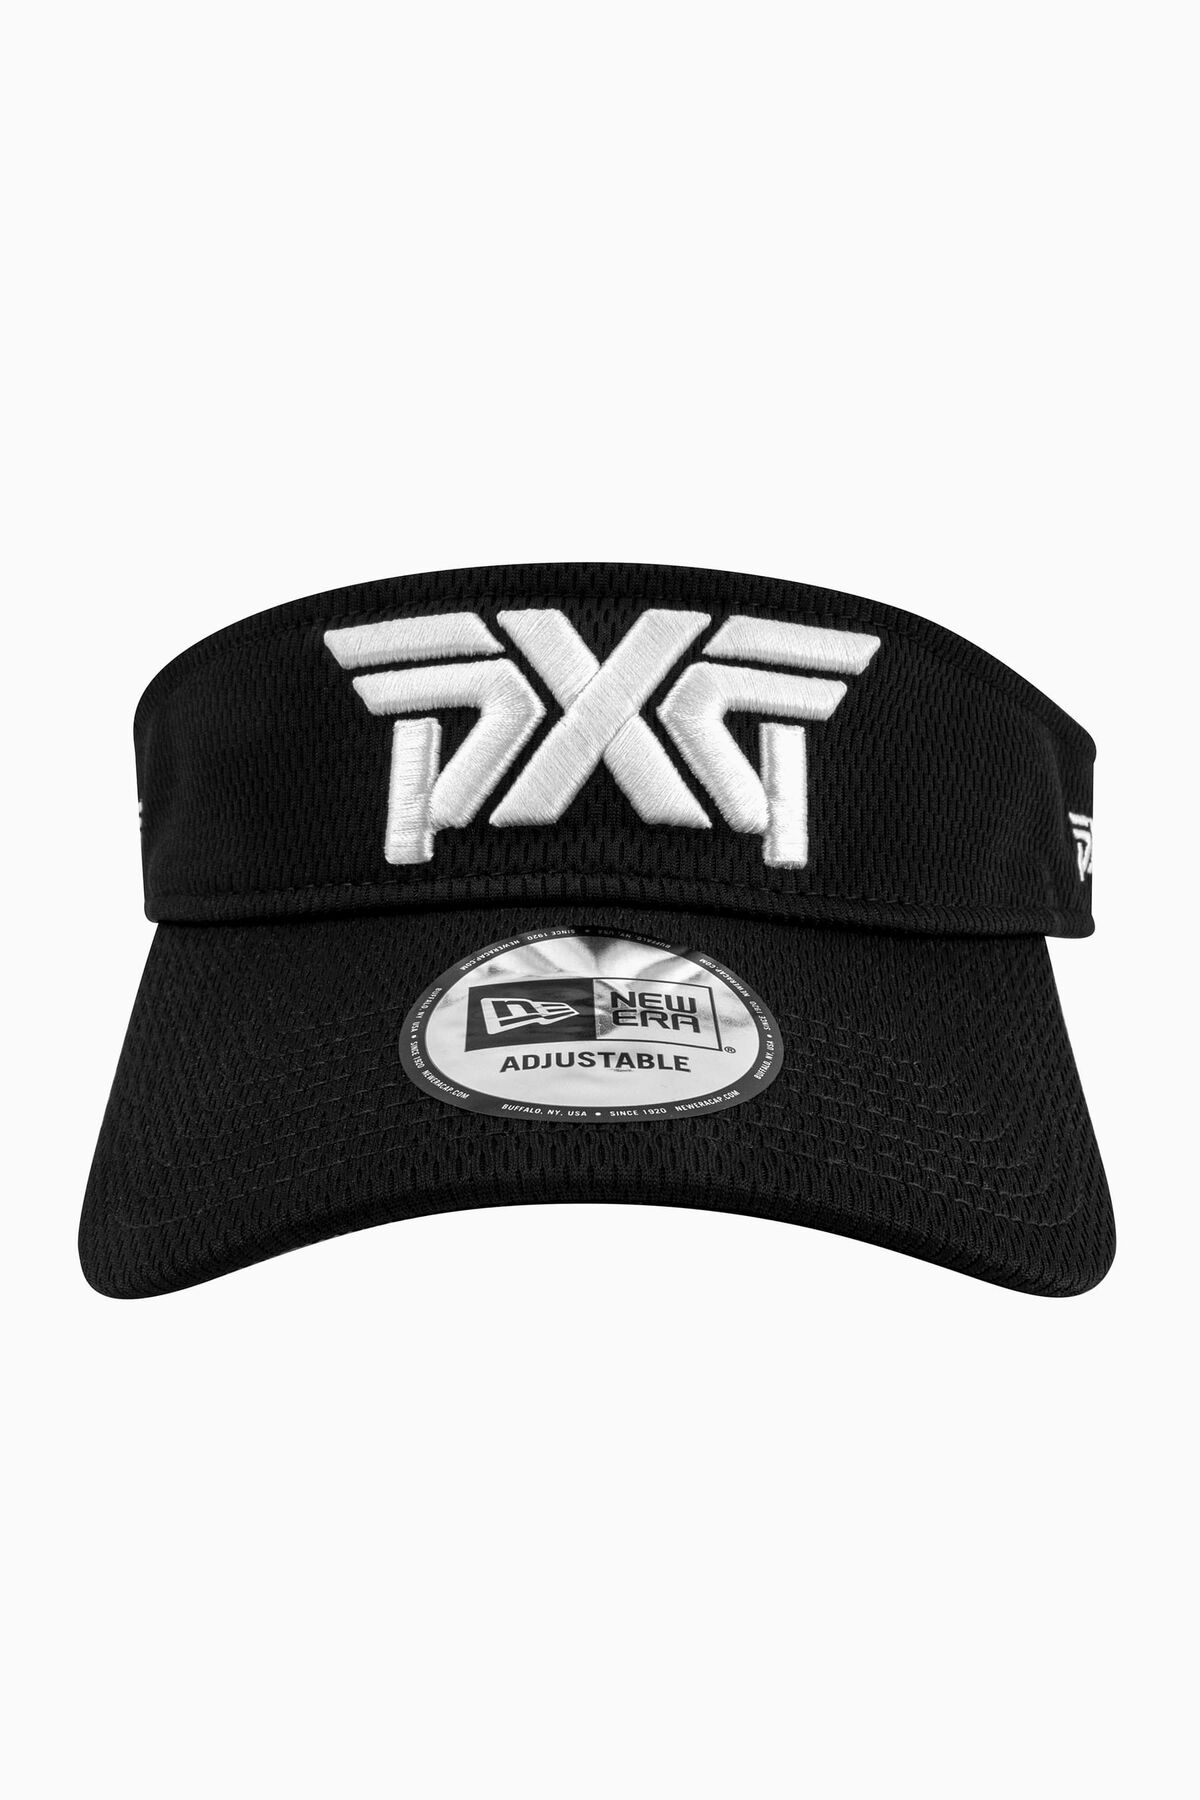 Performance Line Sport Visor | Shop the Highest Quality Golf Apparel, Gear,  Accessories and Golf Clubs at PXG